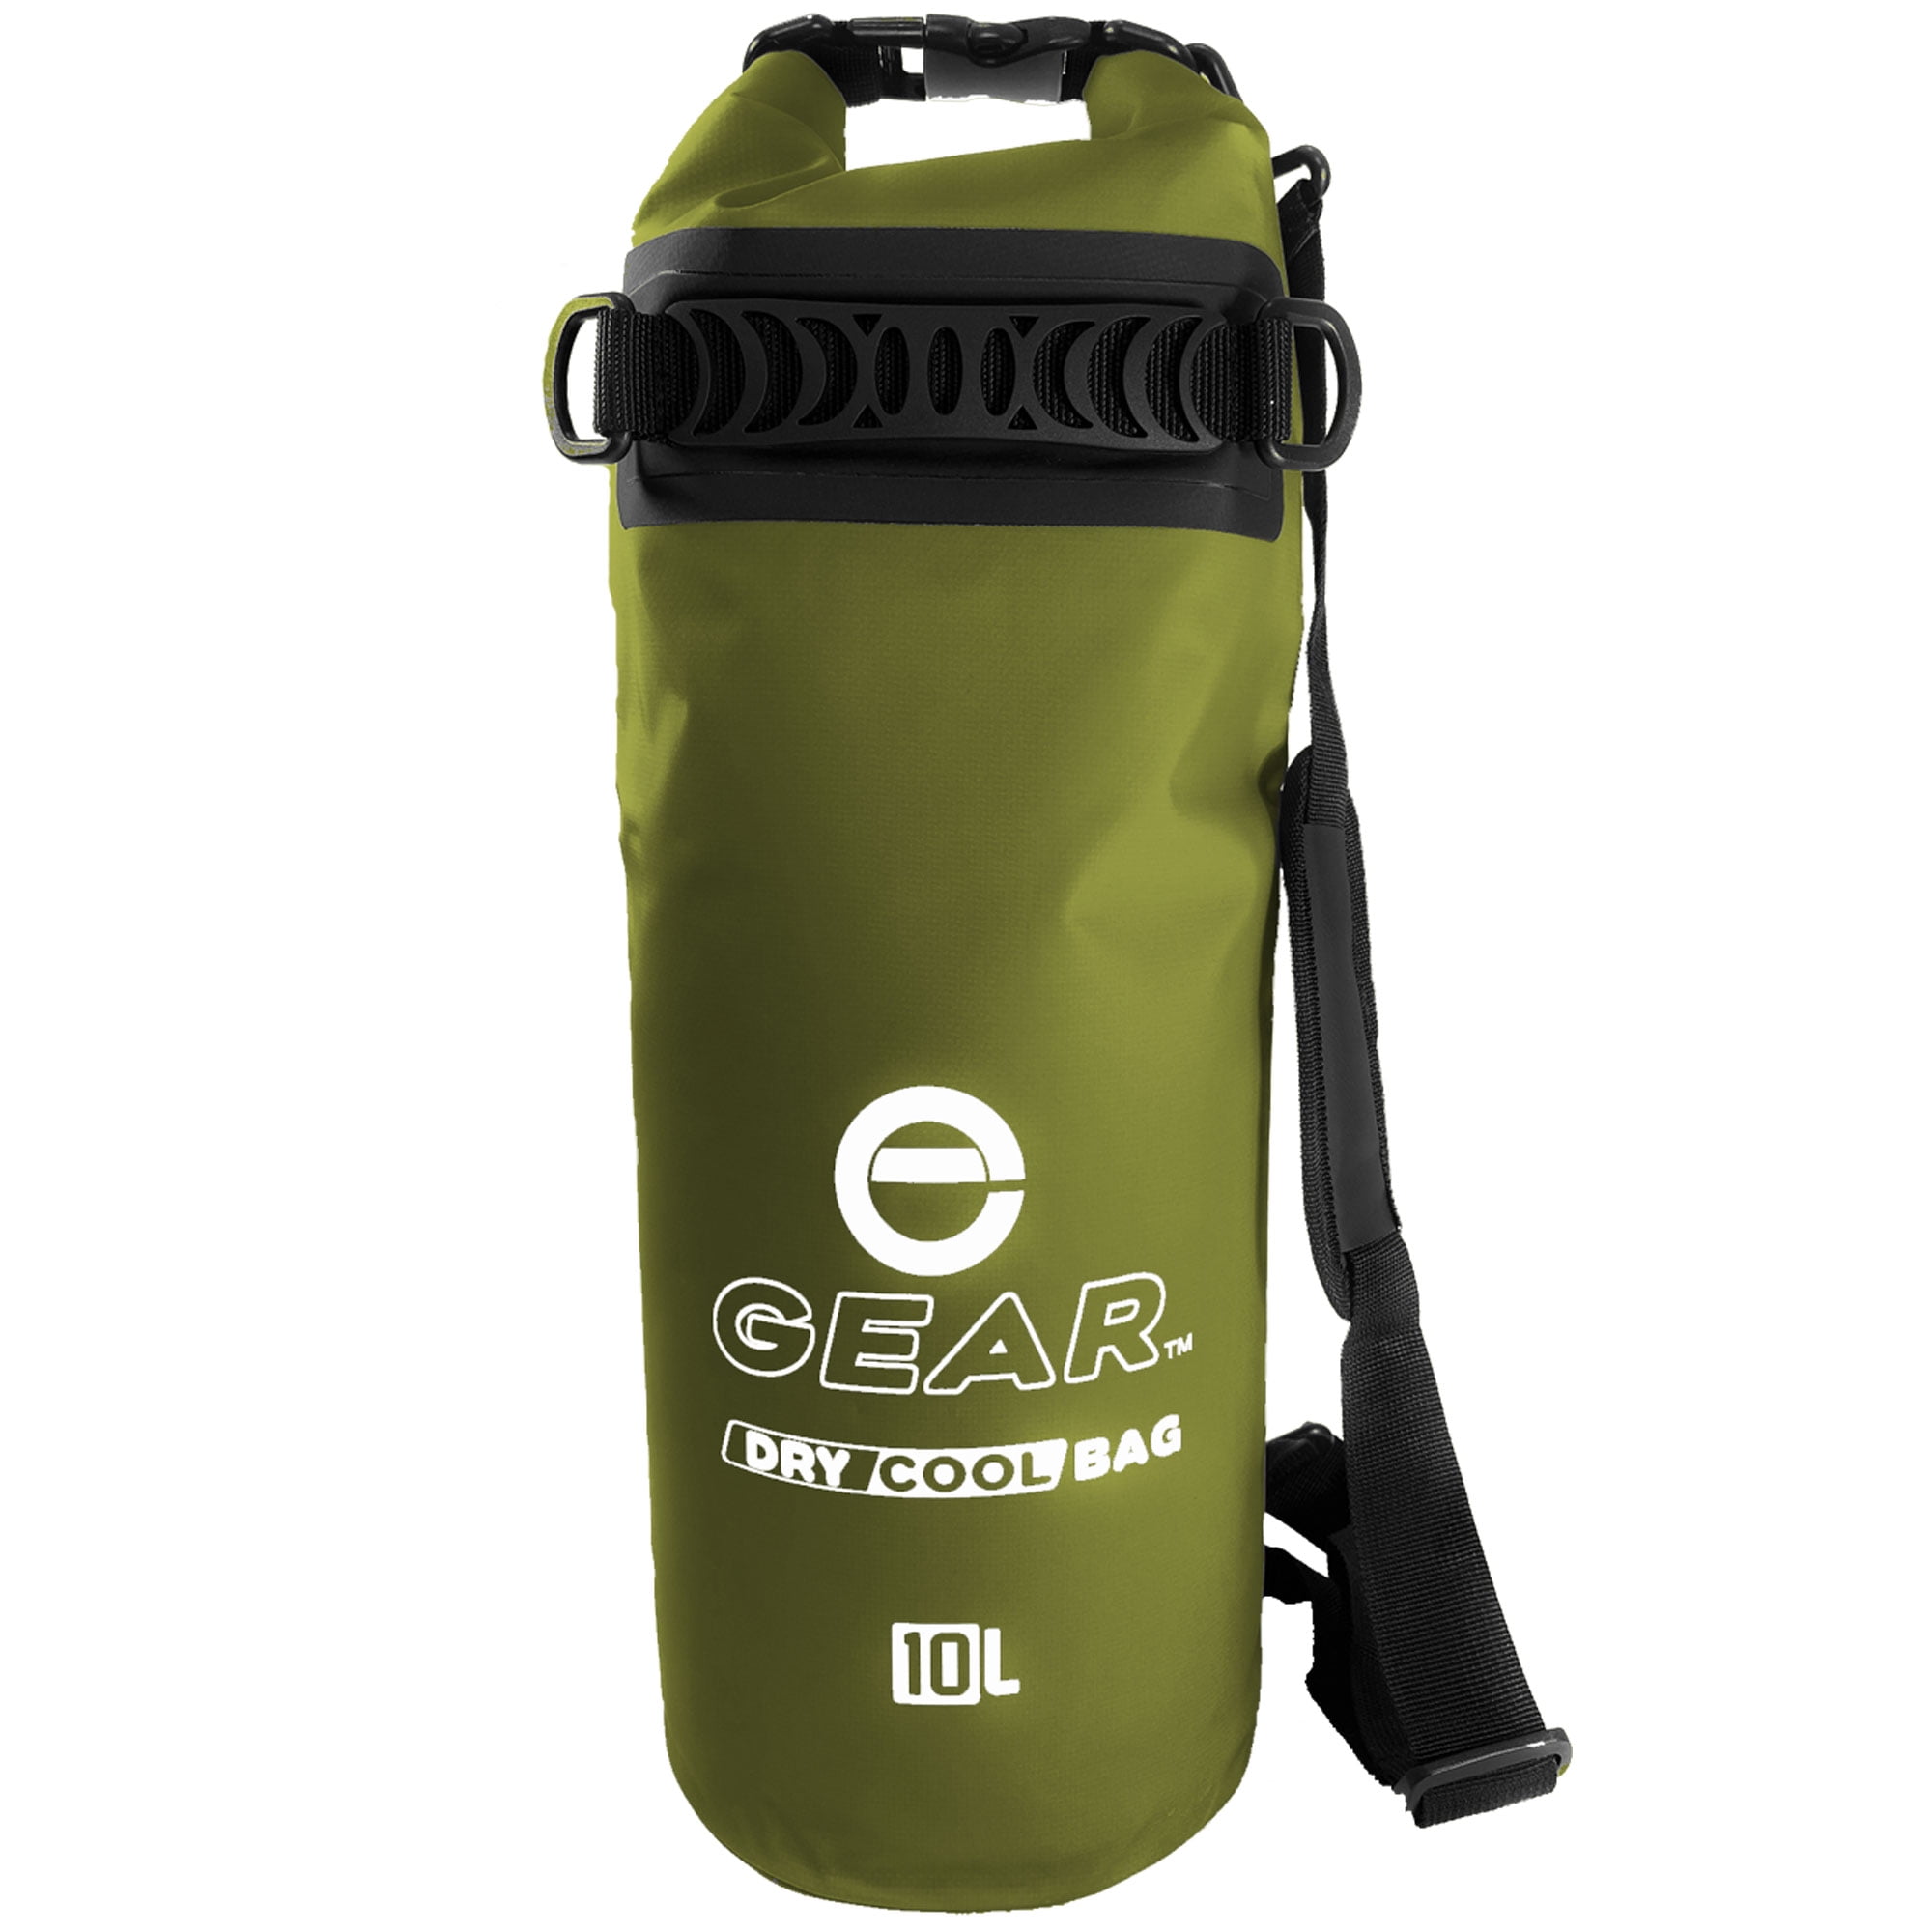 Enthusiast Gear Dry Bag Cooler - Roll Top, Insulated, Leak Proof,  Collapsible, Waterproof - 25L 